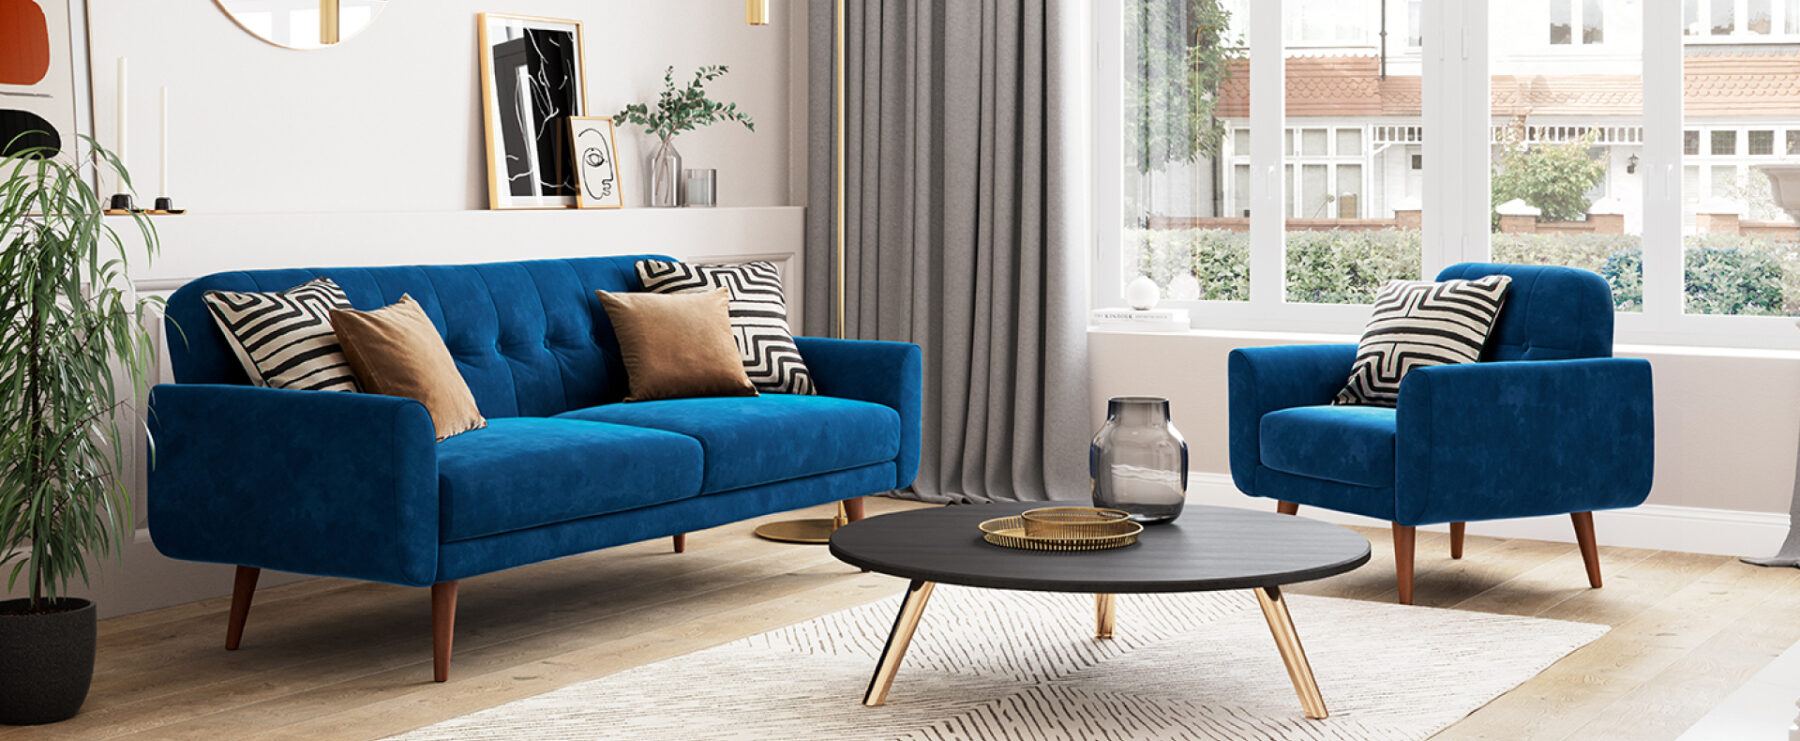 Living room space with blue velvet sofa and chair